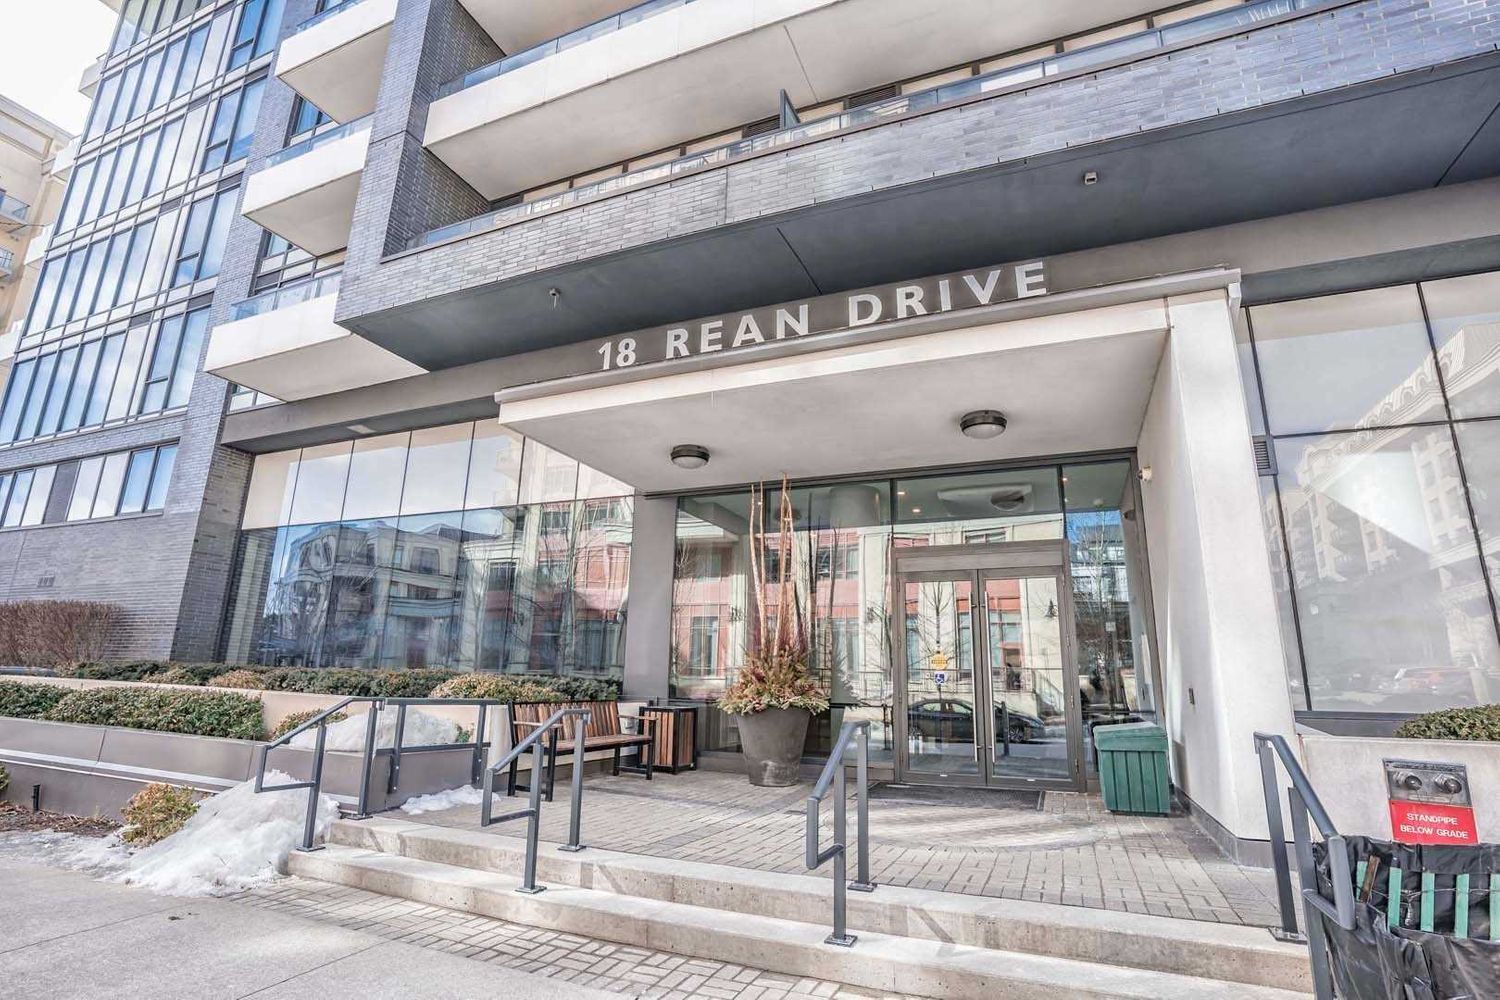 18 Rean Drive. NY2 Condos is located in  North York, Toronto - image #2 of 2